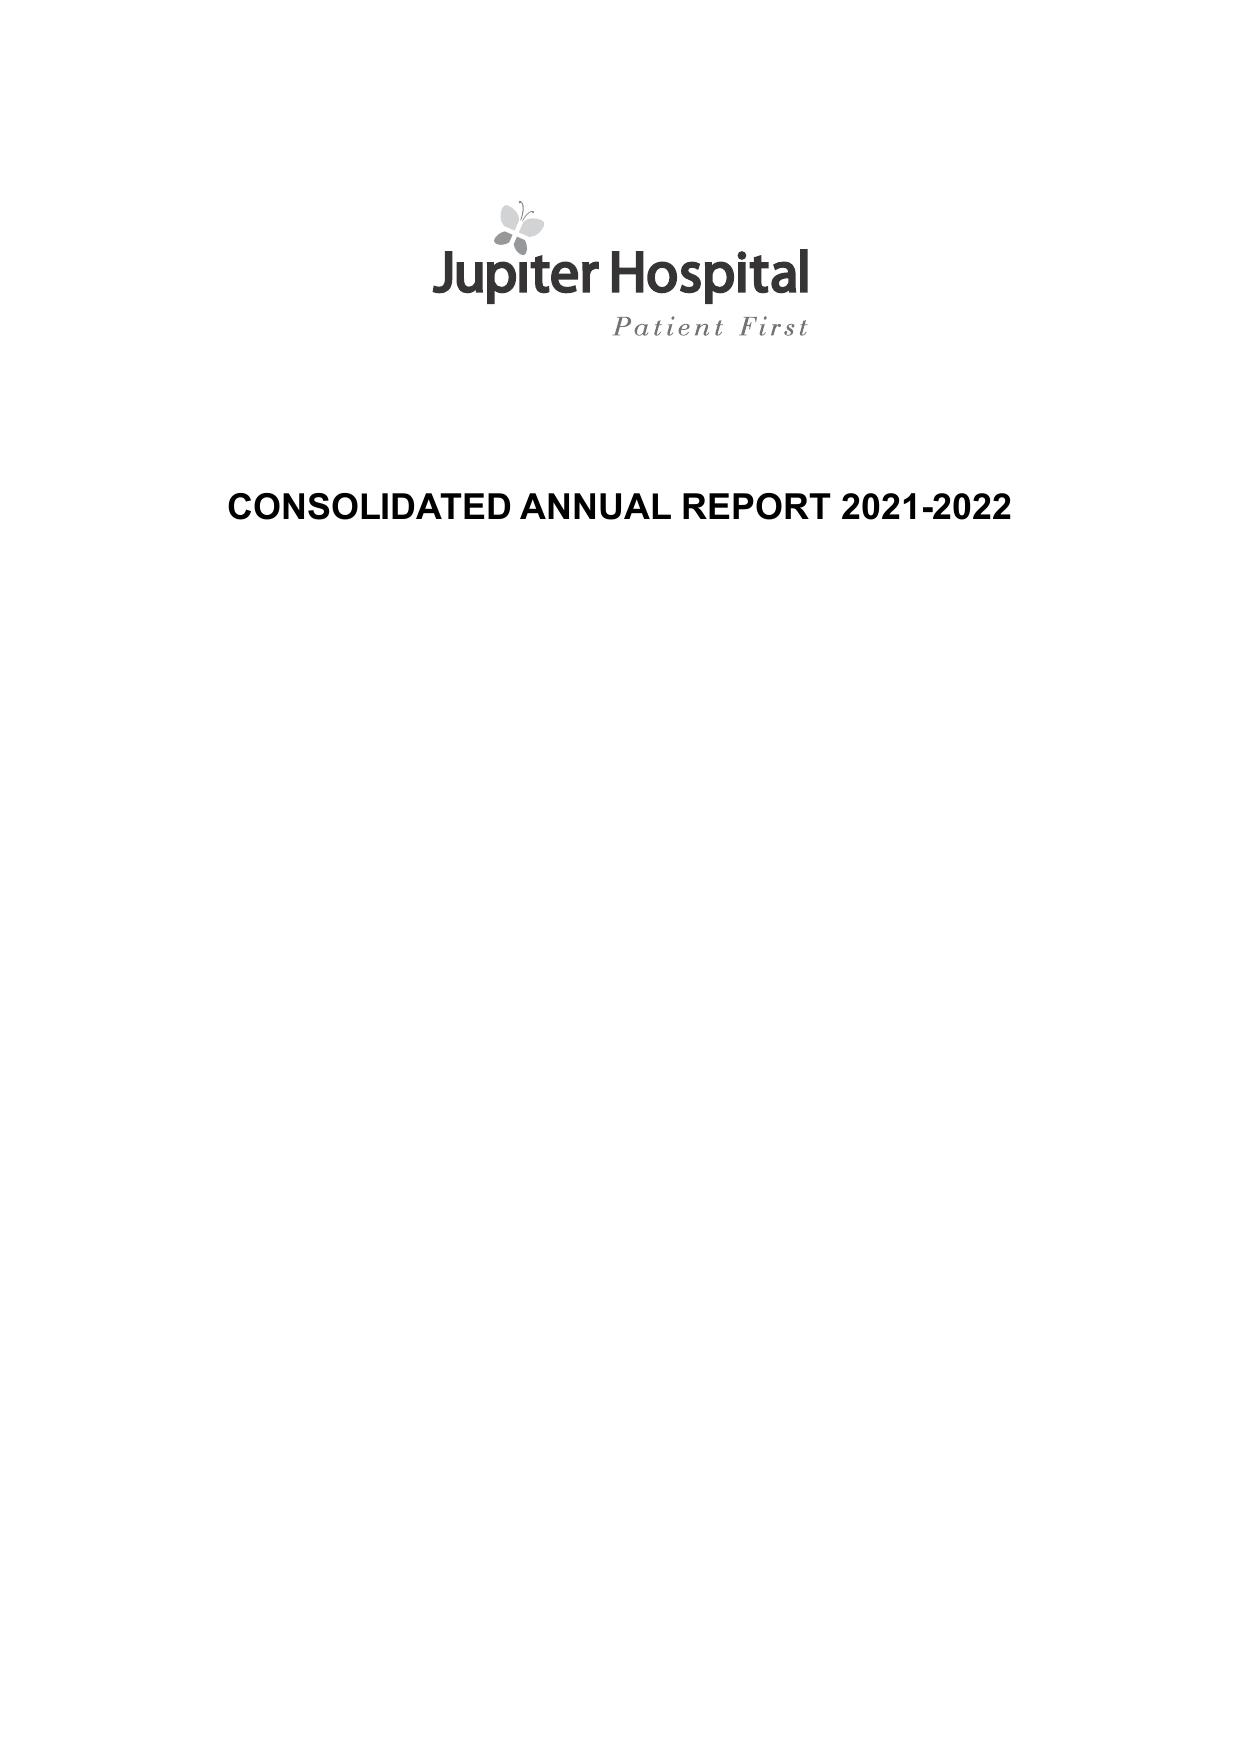 OREGONCLINIC 2022 Annual Report